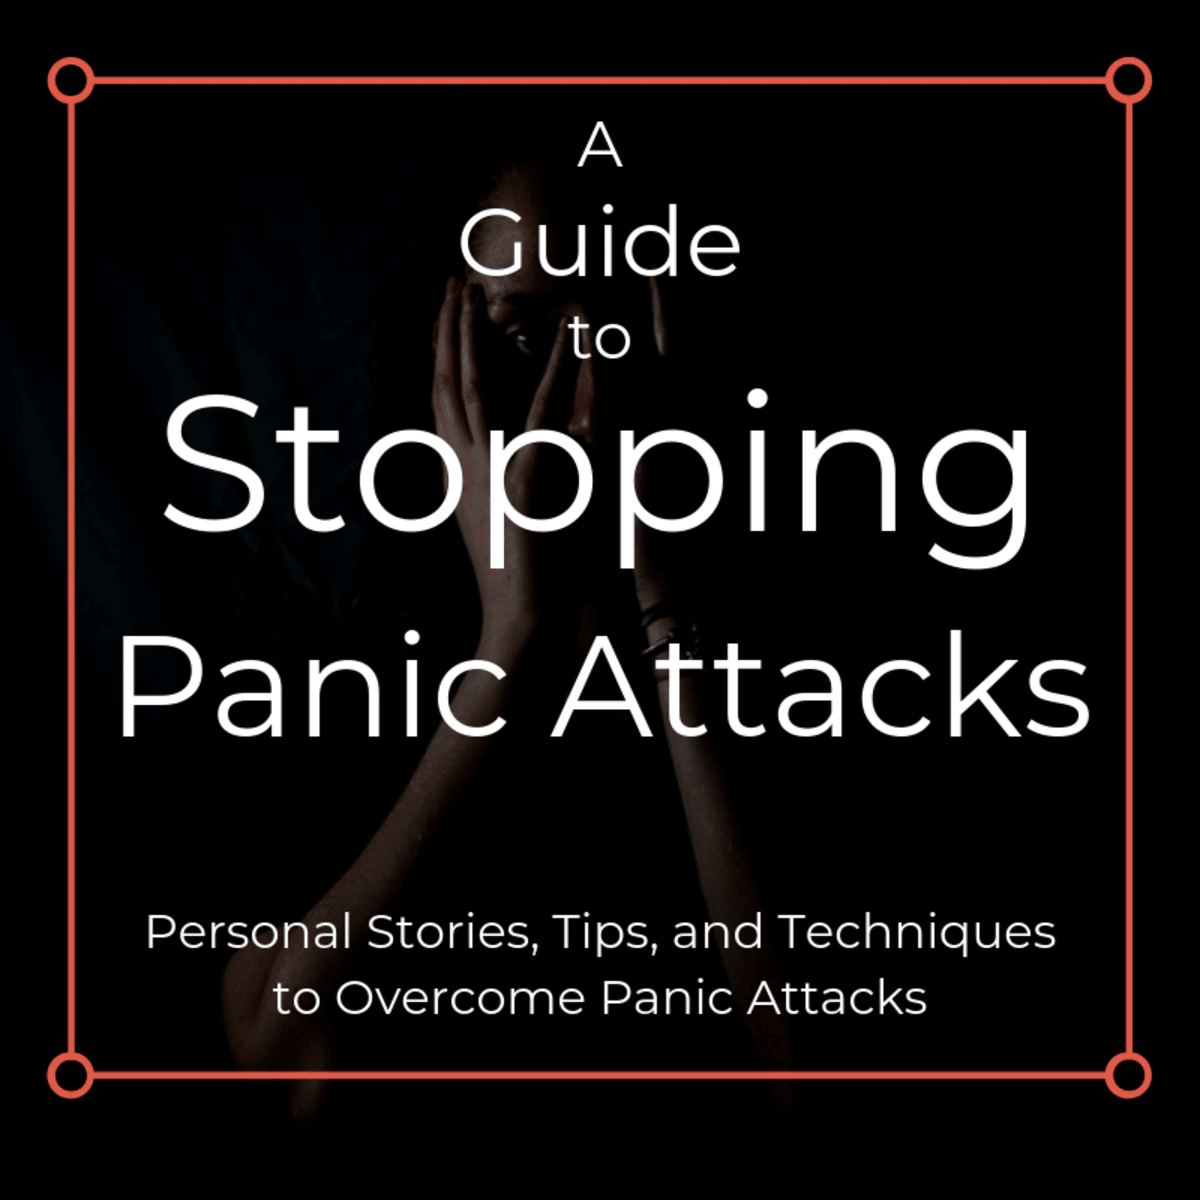 A Guide to Stopping Panic Attacks in Their Tracks